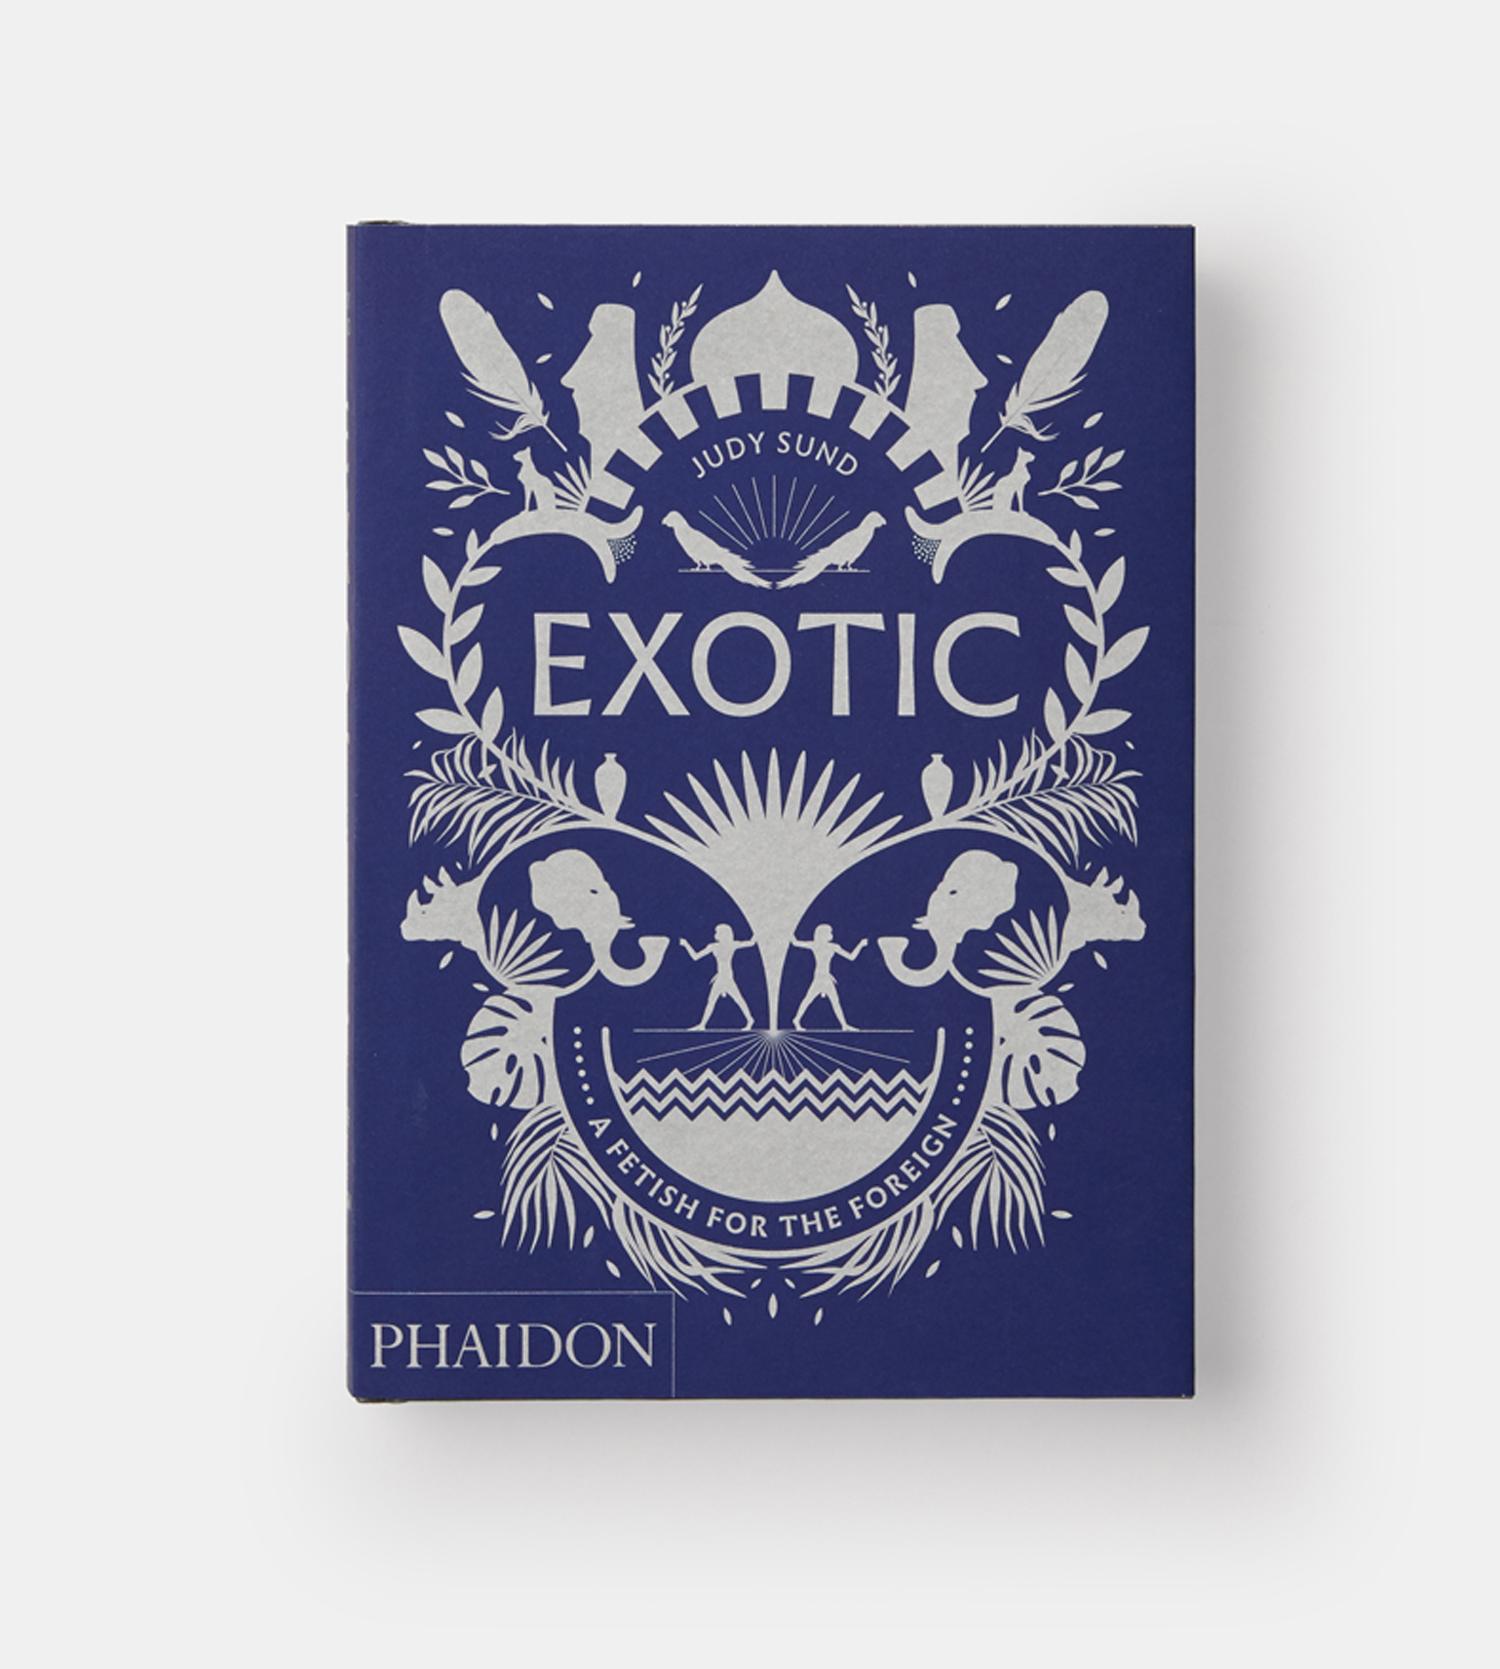 A fascinating survey of the enduring human love affair with the exotic and the strange in art, architecture and design, and its impact on Western culture
Exotic explores our obsession with the lure of distant lands and their promise of the weird and